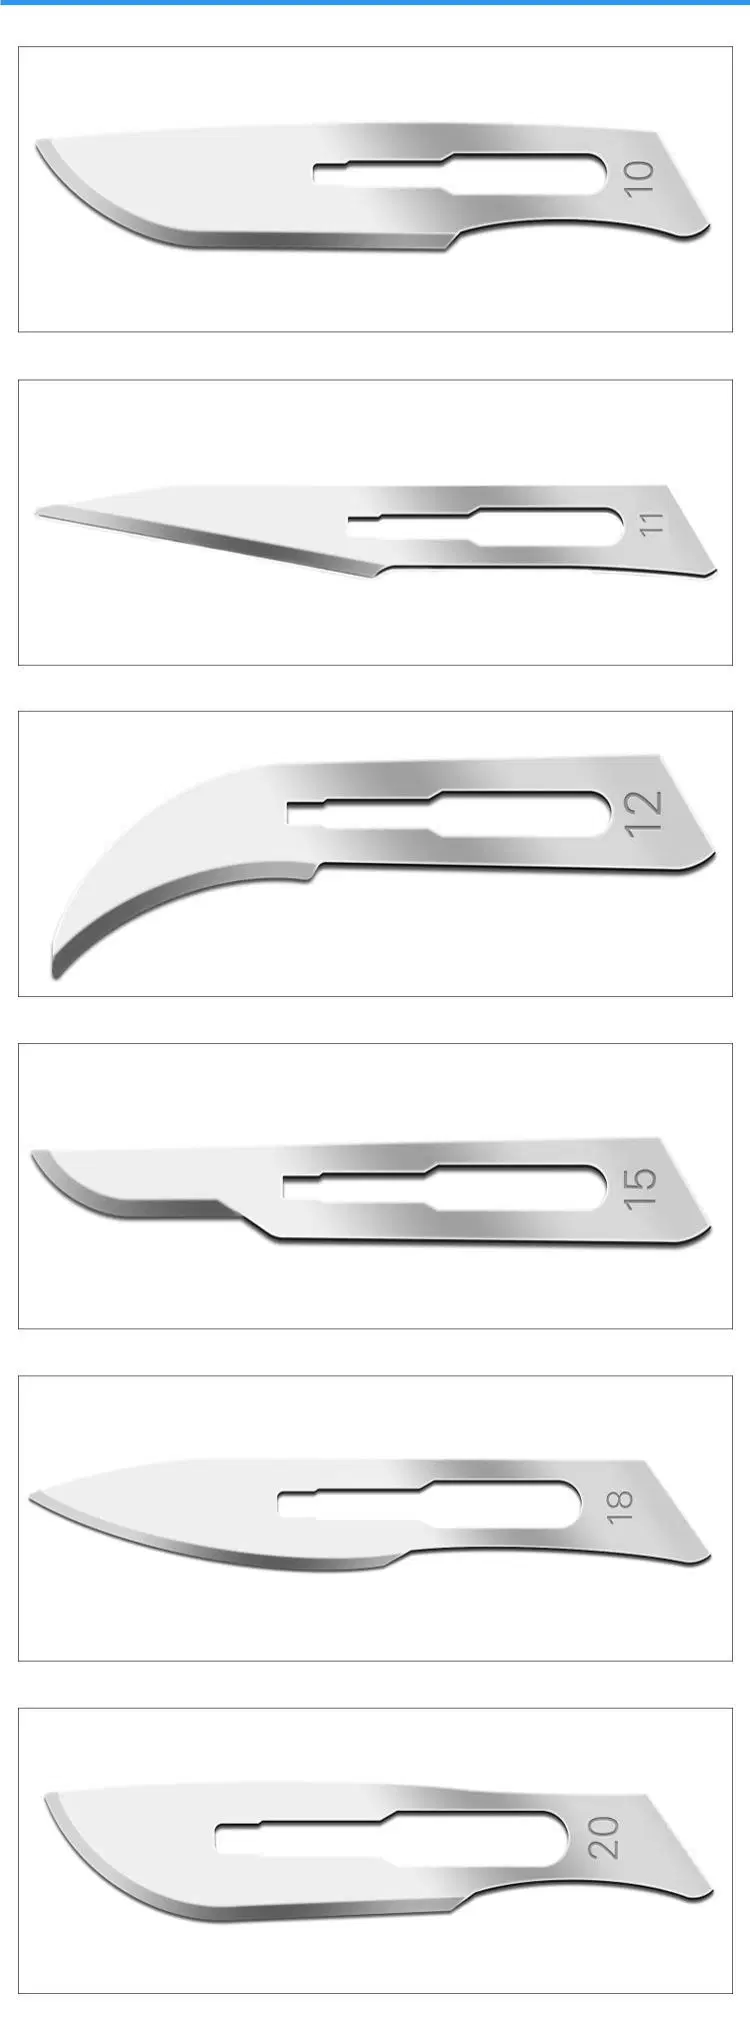 High Quality Hard Carbon Steel Surgical Scalpel Blade Manufacturer